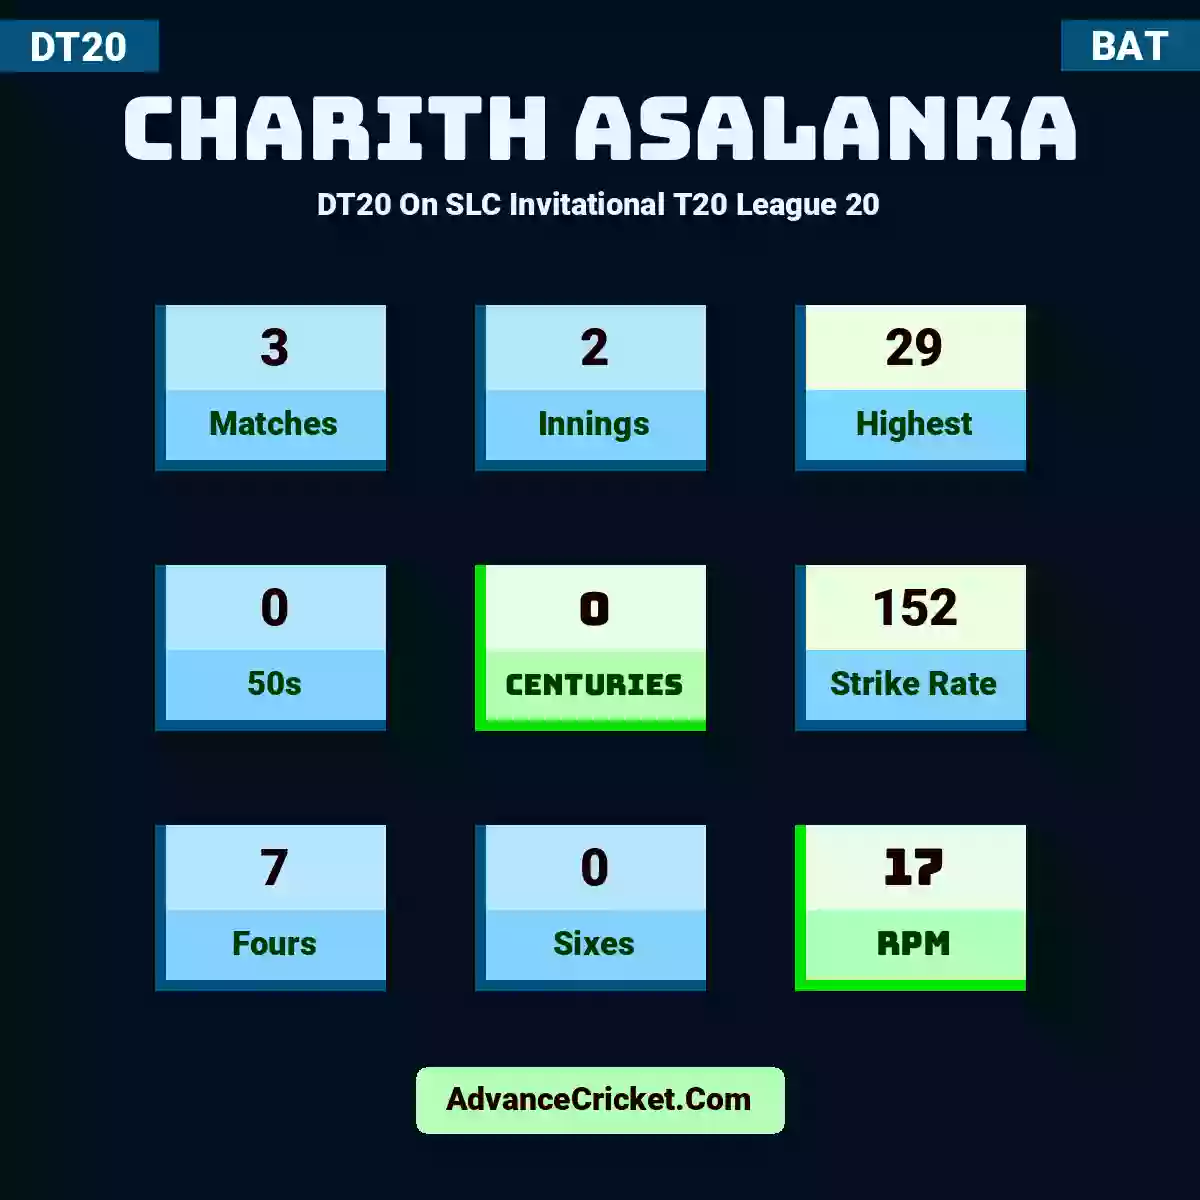 Charith Asalanka DT20  On SLC Invitational T20 League 20, Charith Asalanka played 3 matches, scored 29 runs as highest, 0 half-centuries, and 0 centuries, with a strike rate of 152. C.Asalanka hit 7 fours and 0 sixes, with an RPM of 17.